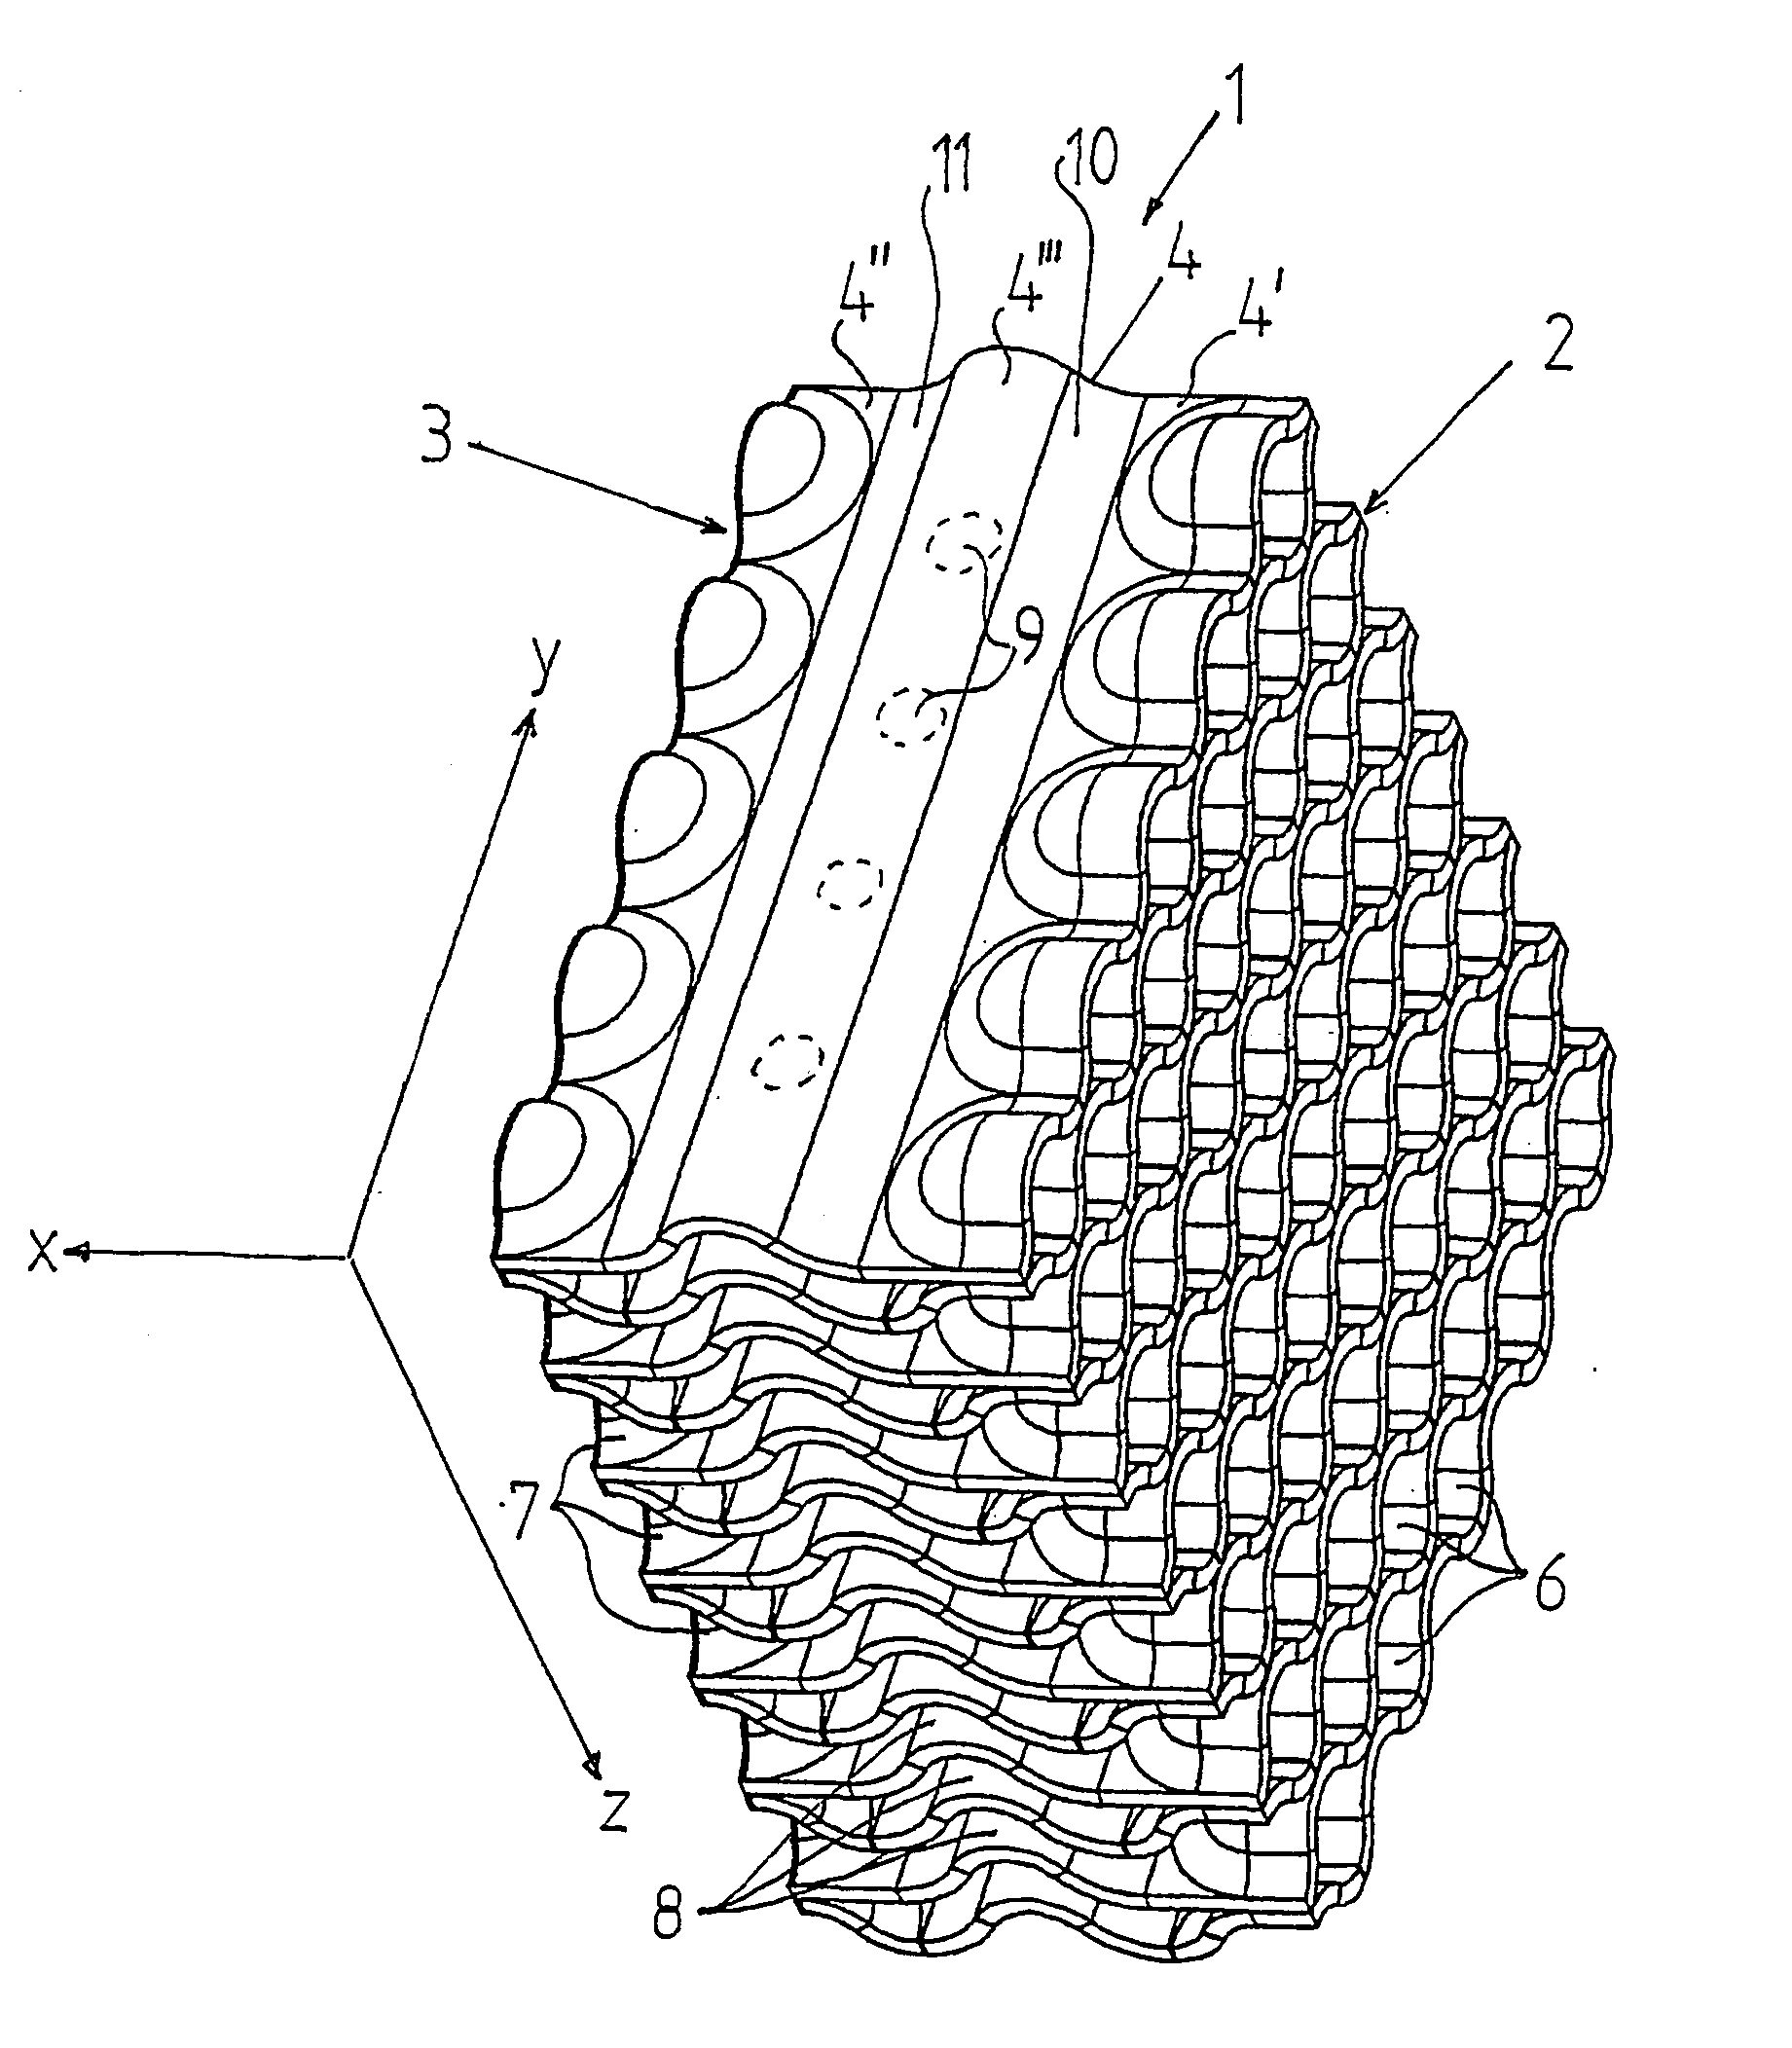 Filter for cooling water in a light water cooled nuclear reactor